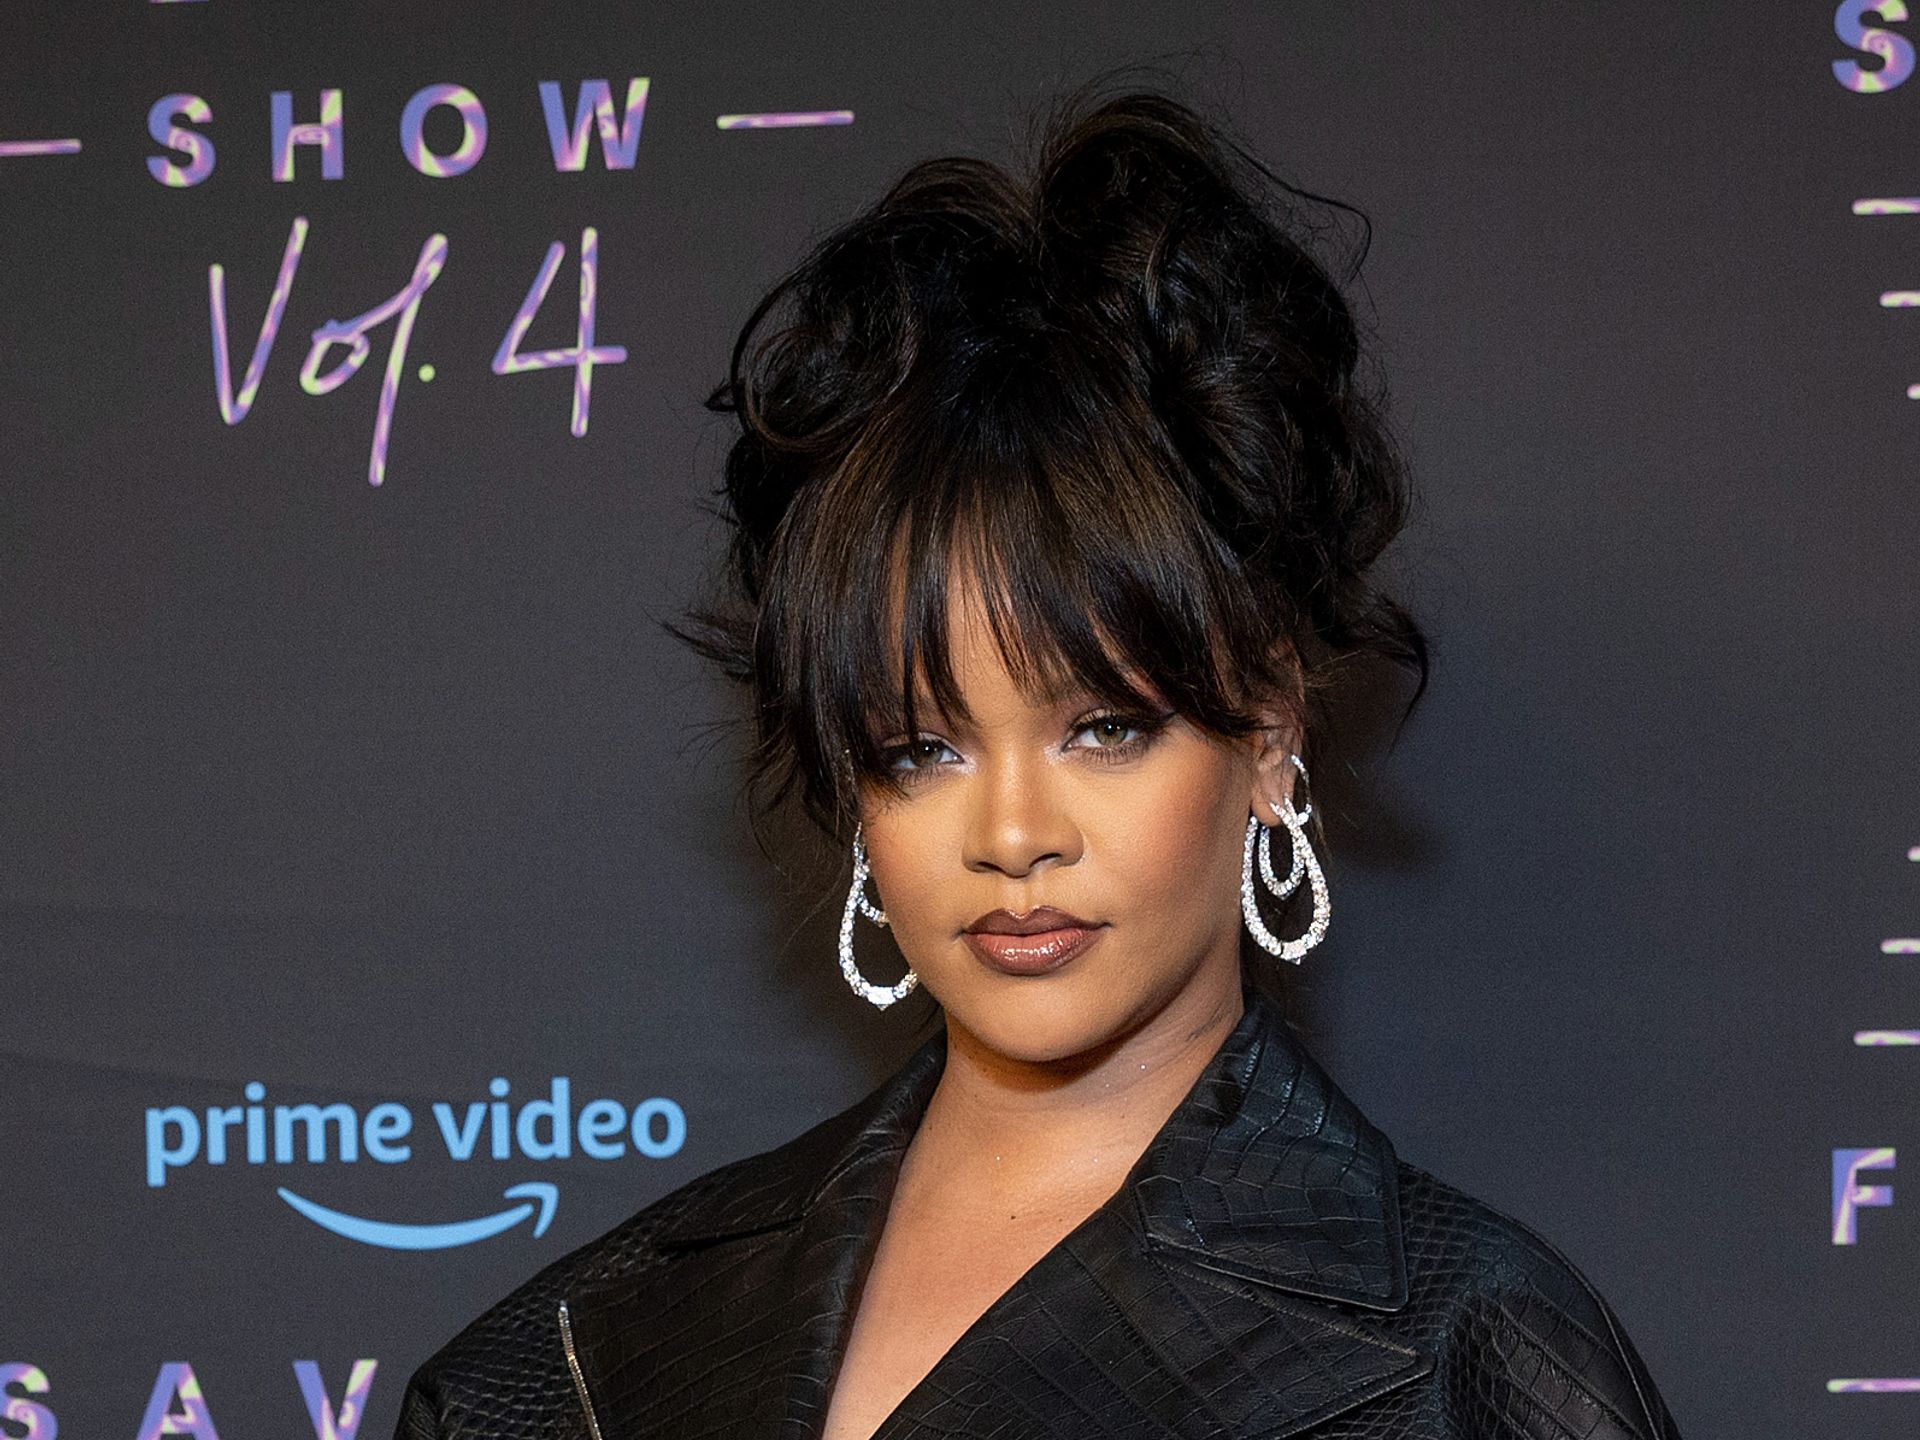 Prime Video: Diamonds in the Style of Rihanna